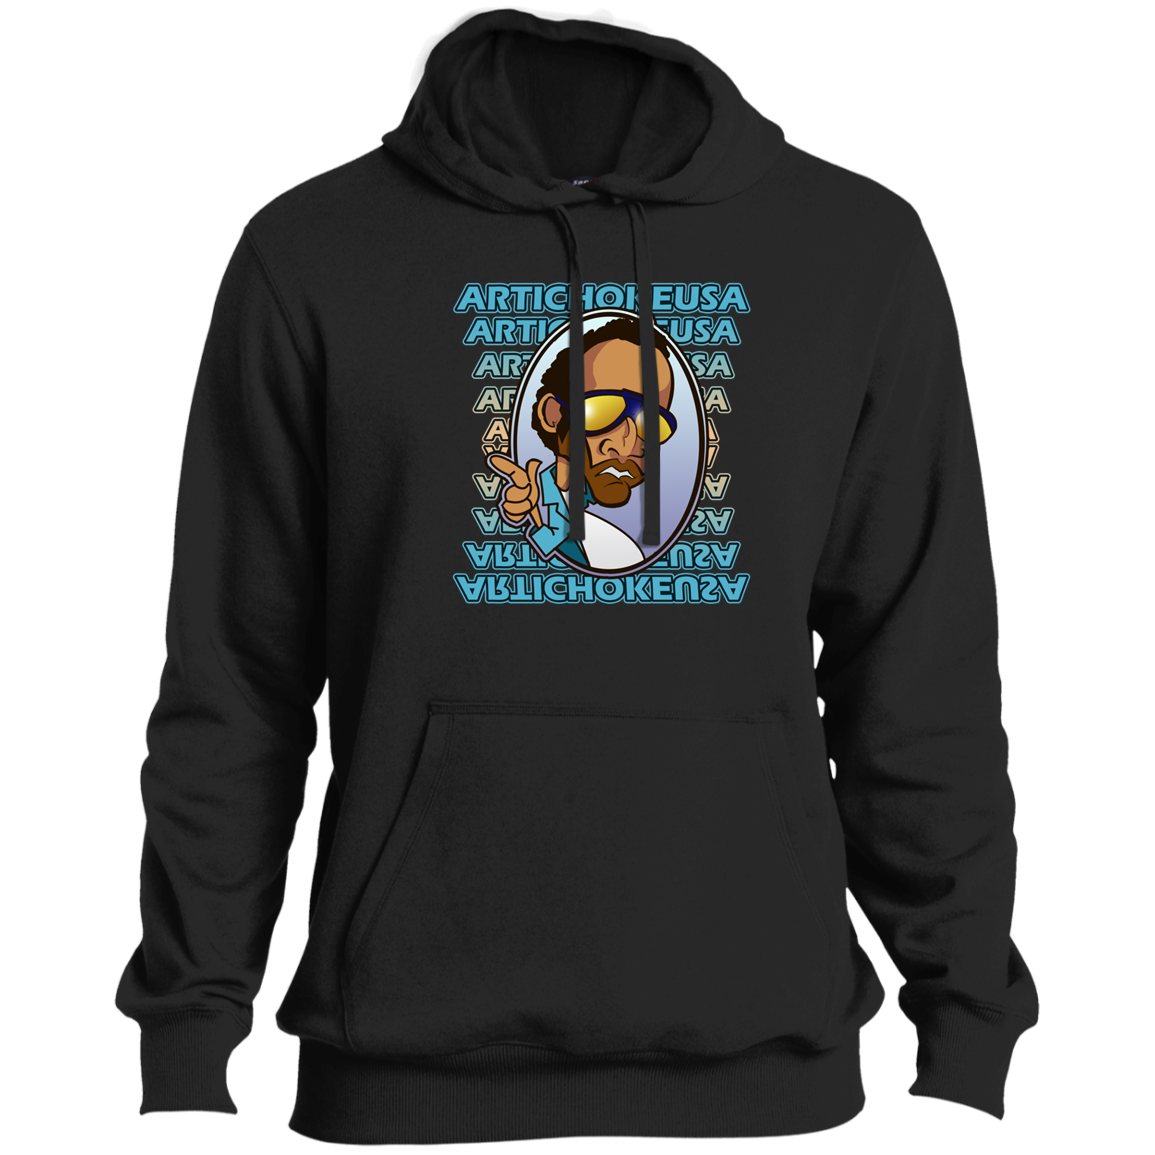 ArtichokeUSA Character and Font design. Let's Create Your Own Team Design Today. My first client Charles. Tall Pullover Hoodie